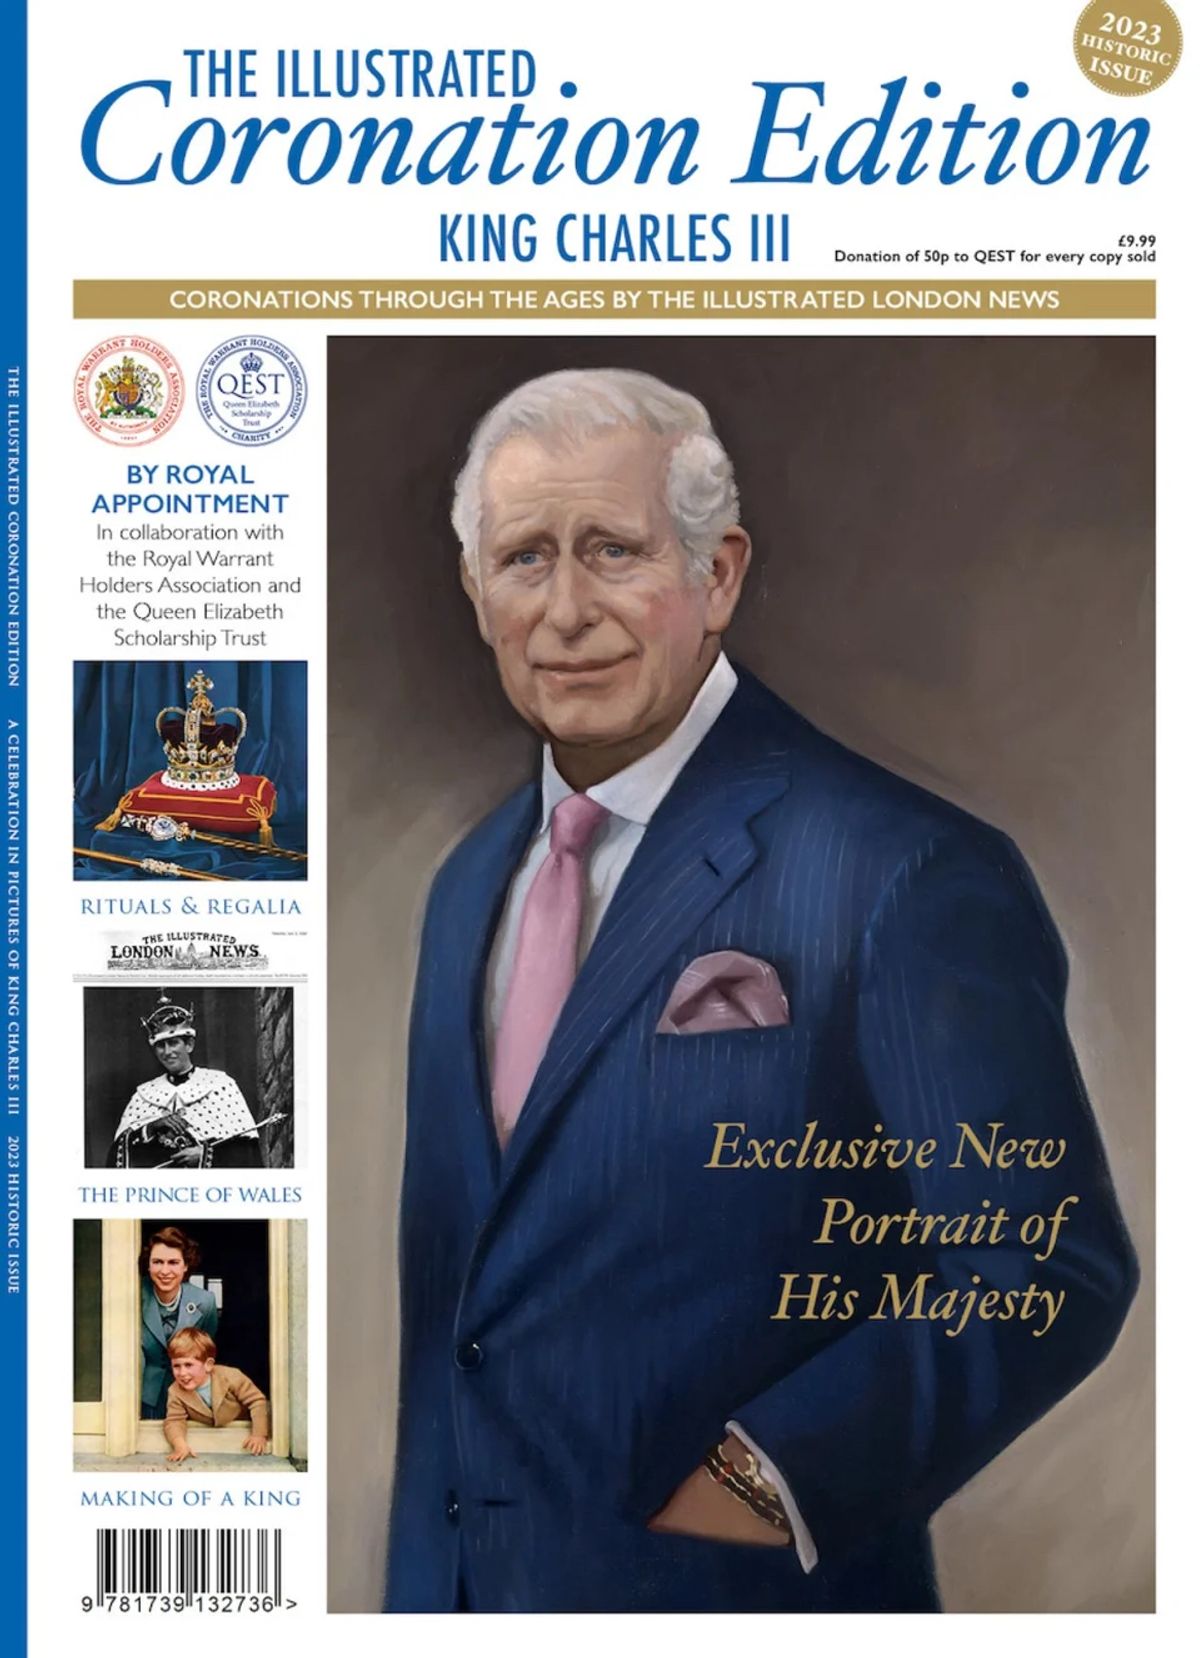 King Charles III by Alastair Barford on the cover of Illustrated London News

courtesy Illustrated London News